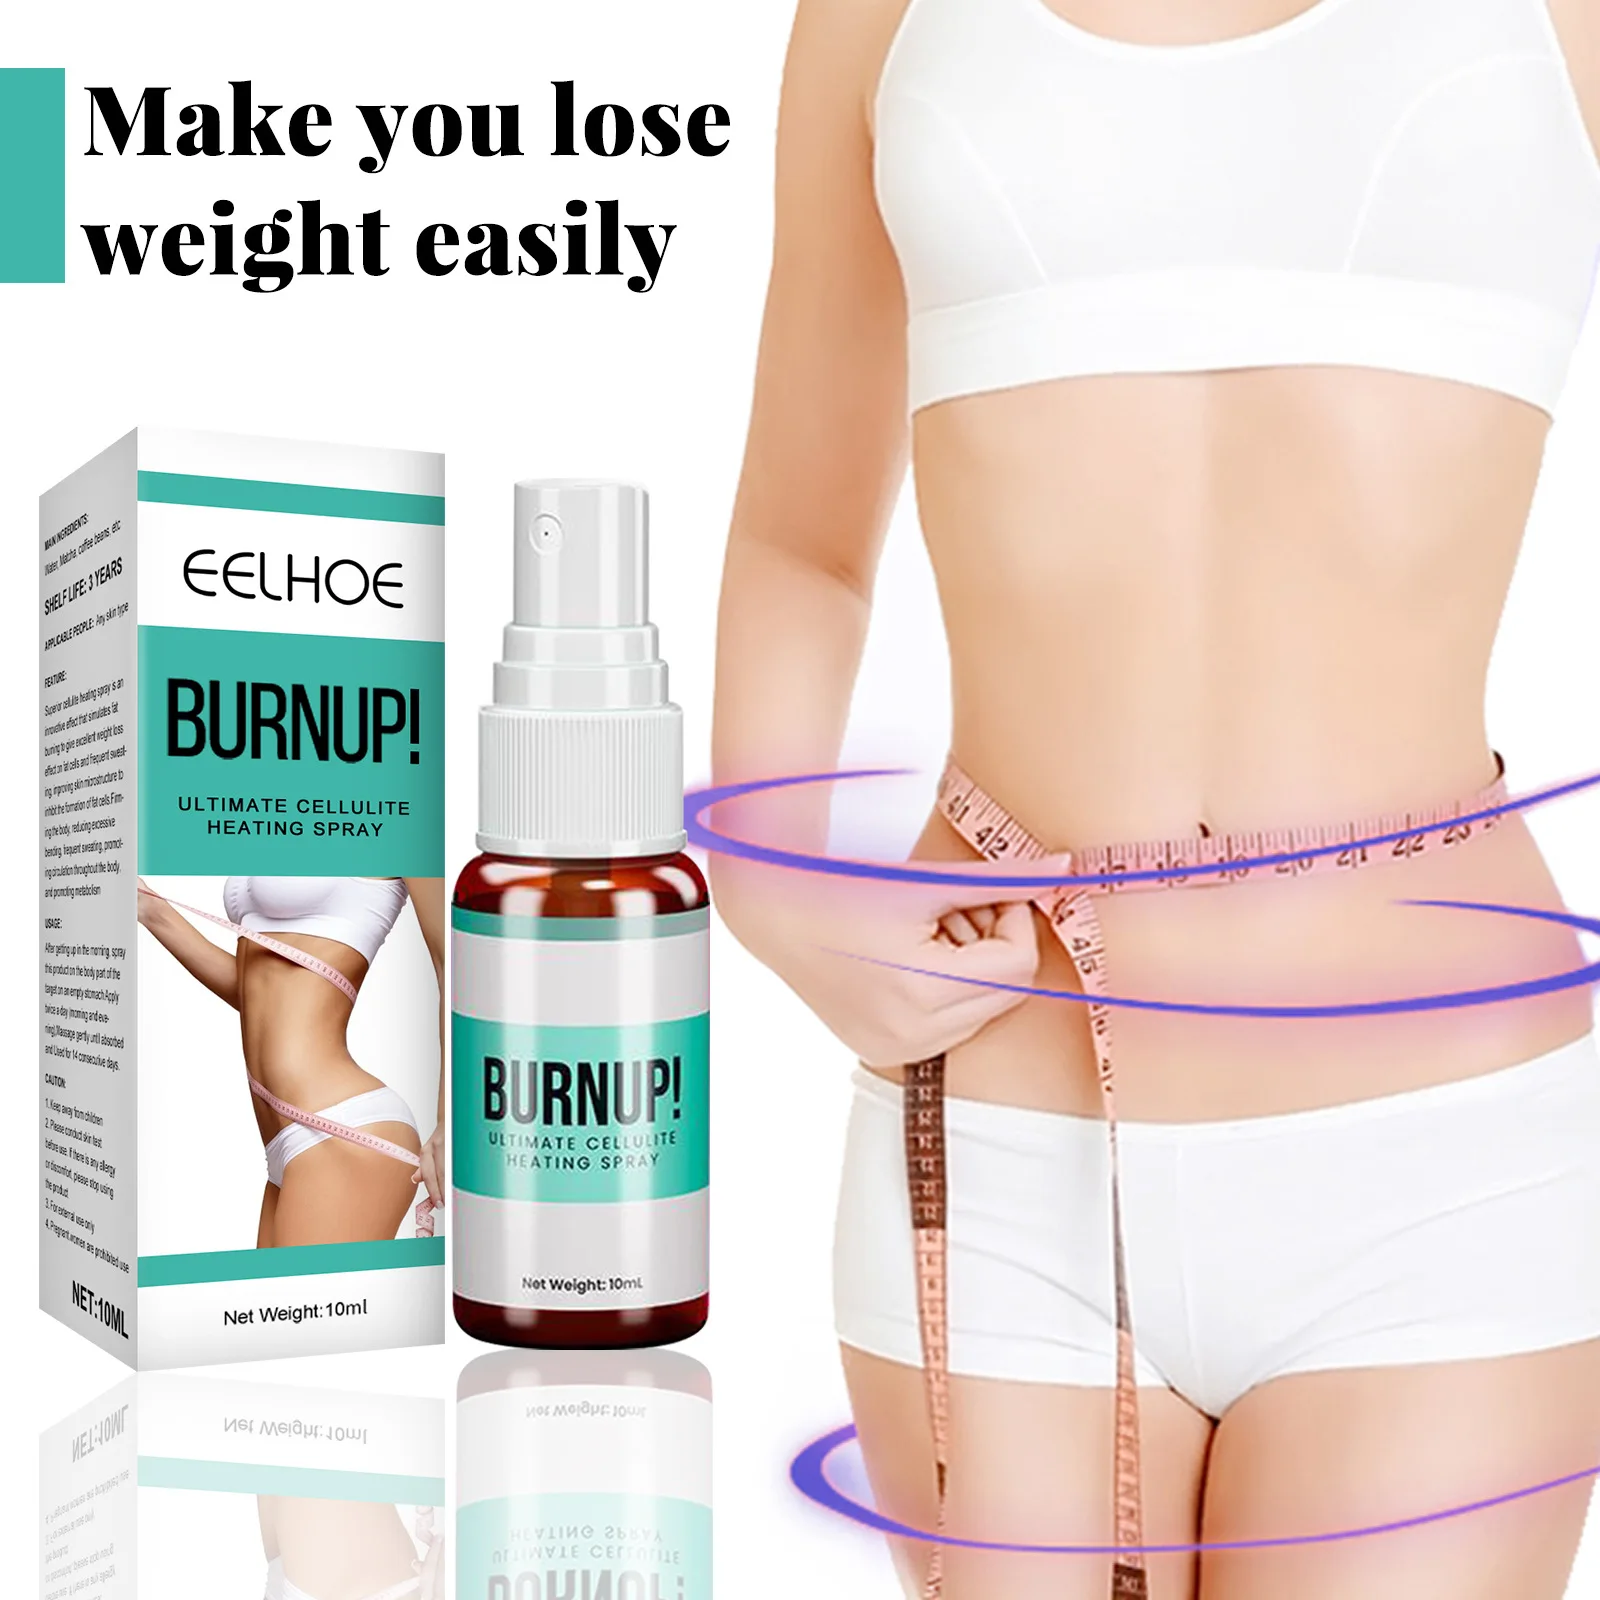 

Fat Burner Spray Weight Loss Body Slimming Spray for Fat Removal Body Shaper for Arms Legs Thighs Abdomen Firming Slimming